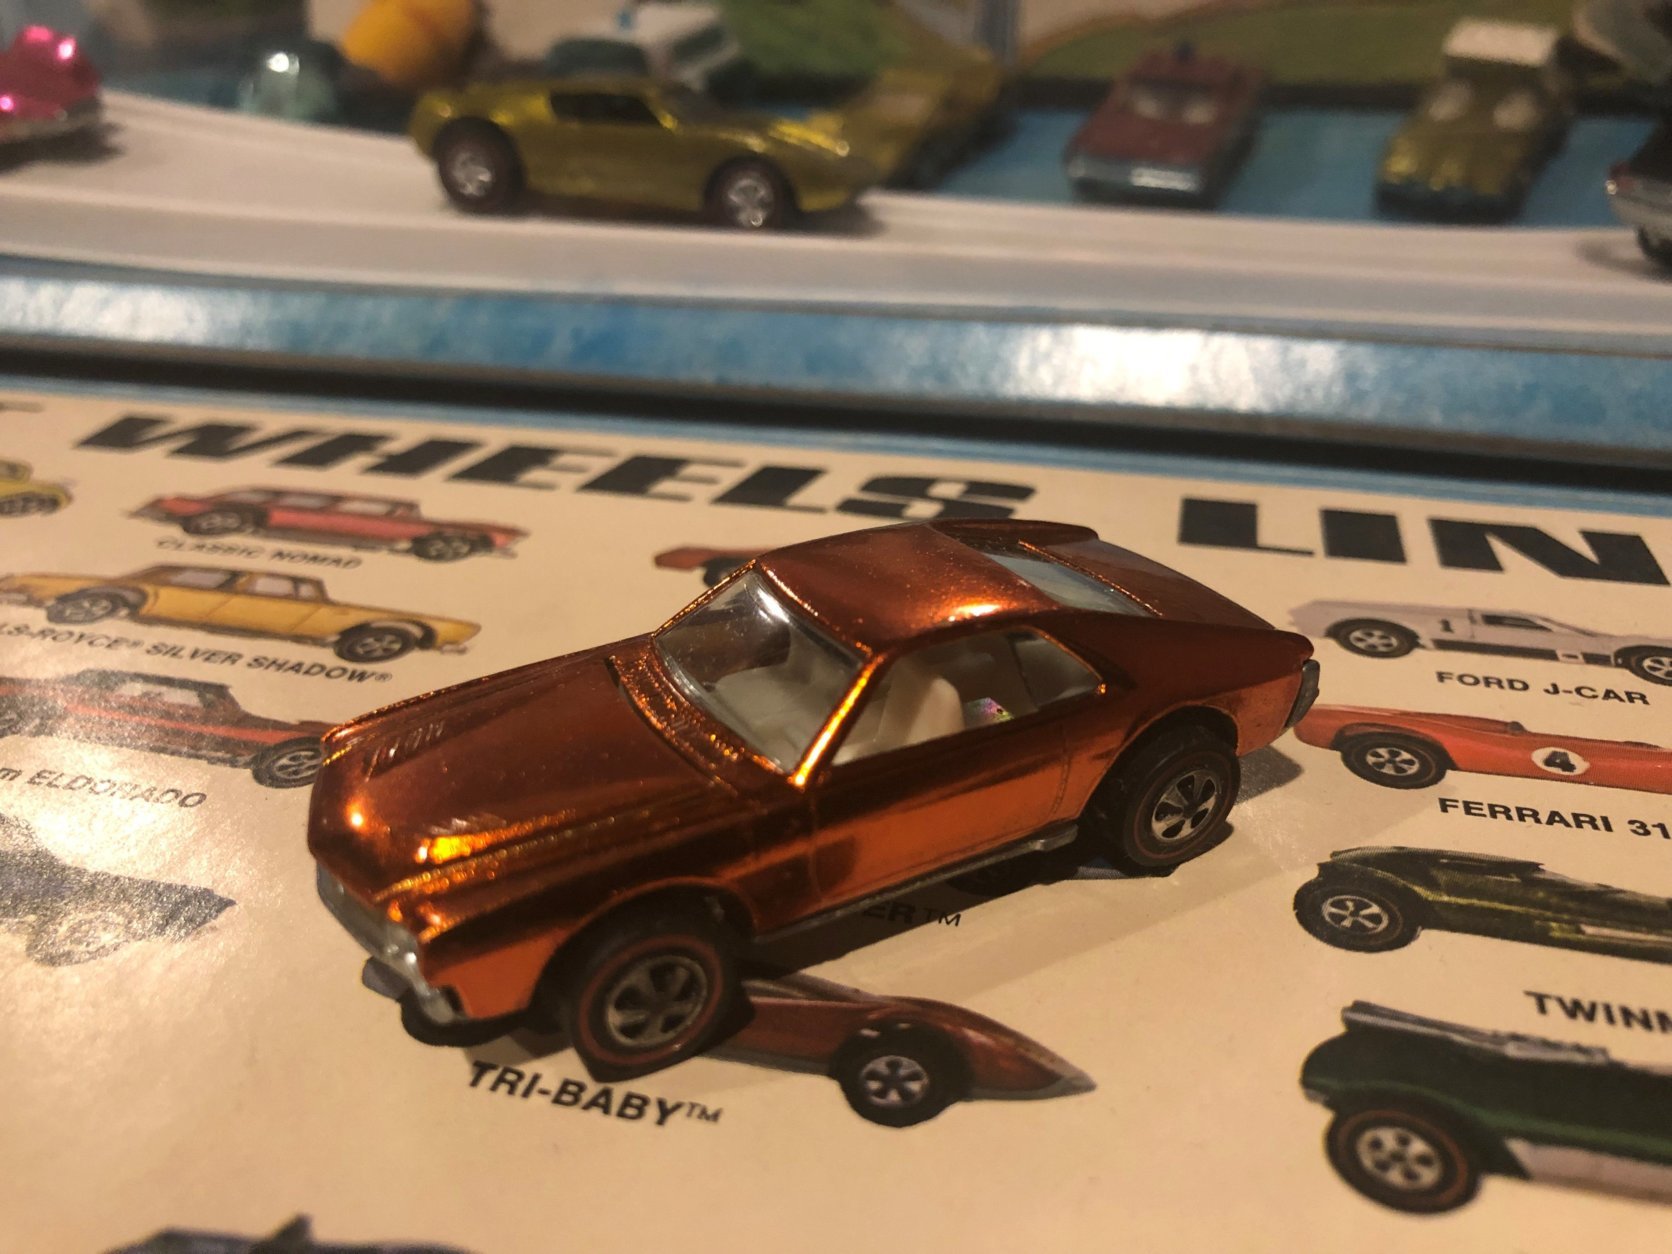 Hot Wheels cars were introduced in 1968. Bruce Pascal of Montgomery County has a collection estimated to be worth $1.5 million. (Courtesy Bruce Pascal)